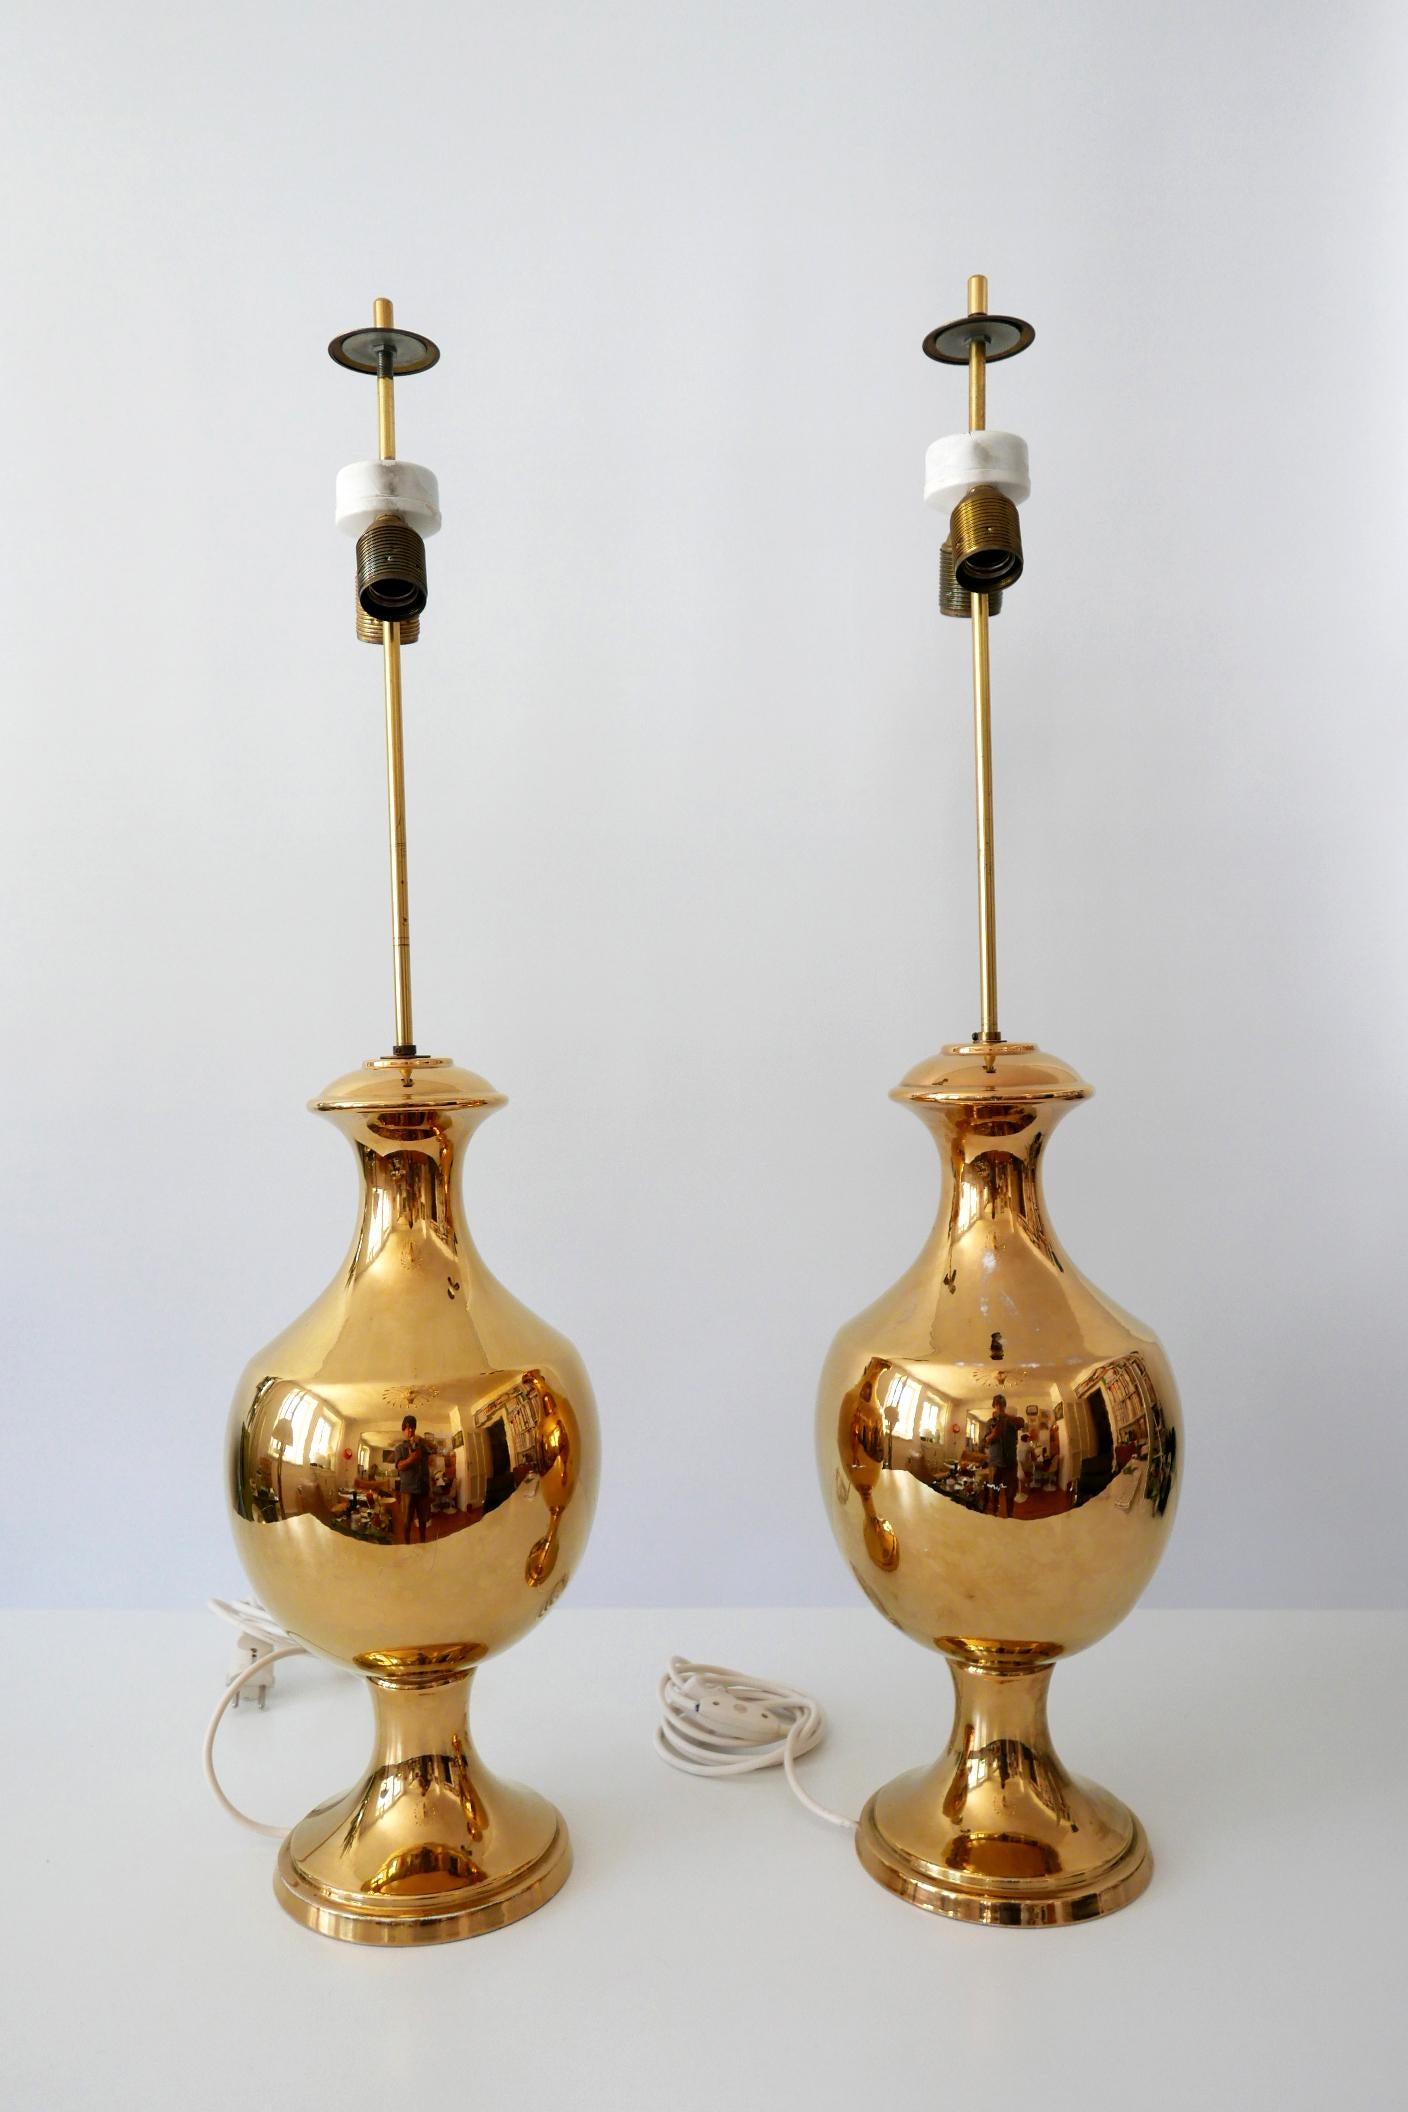 Mid-20th Century Set of Two Huge Gold Glazed Ceramic Table Lamps by Behreno Firenze 1960s Italy For Sale